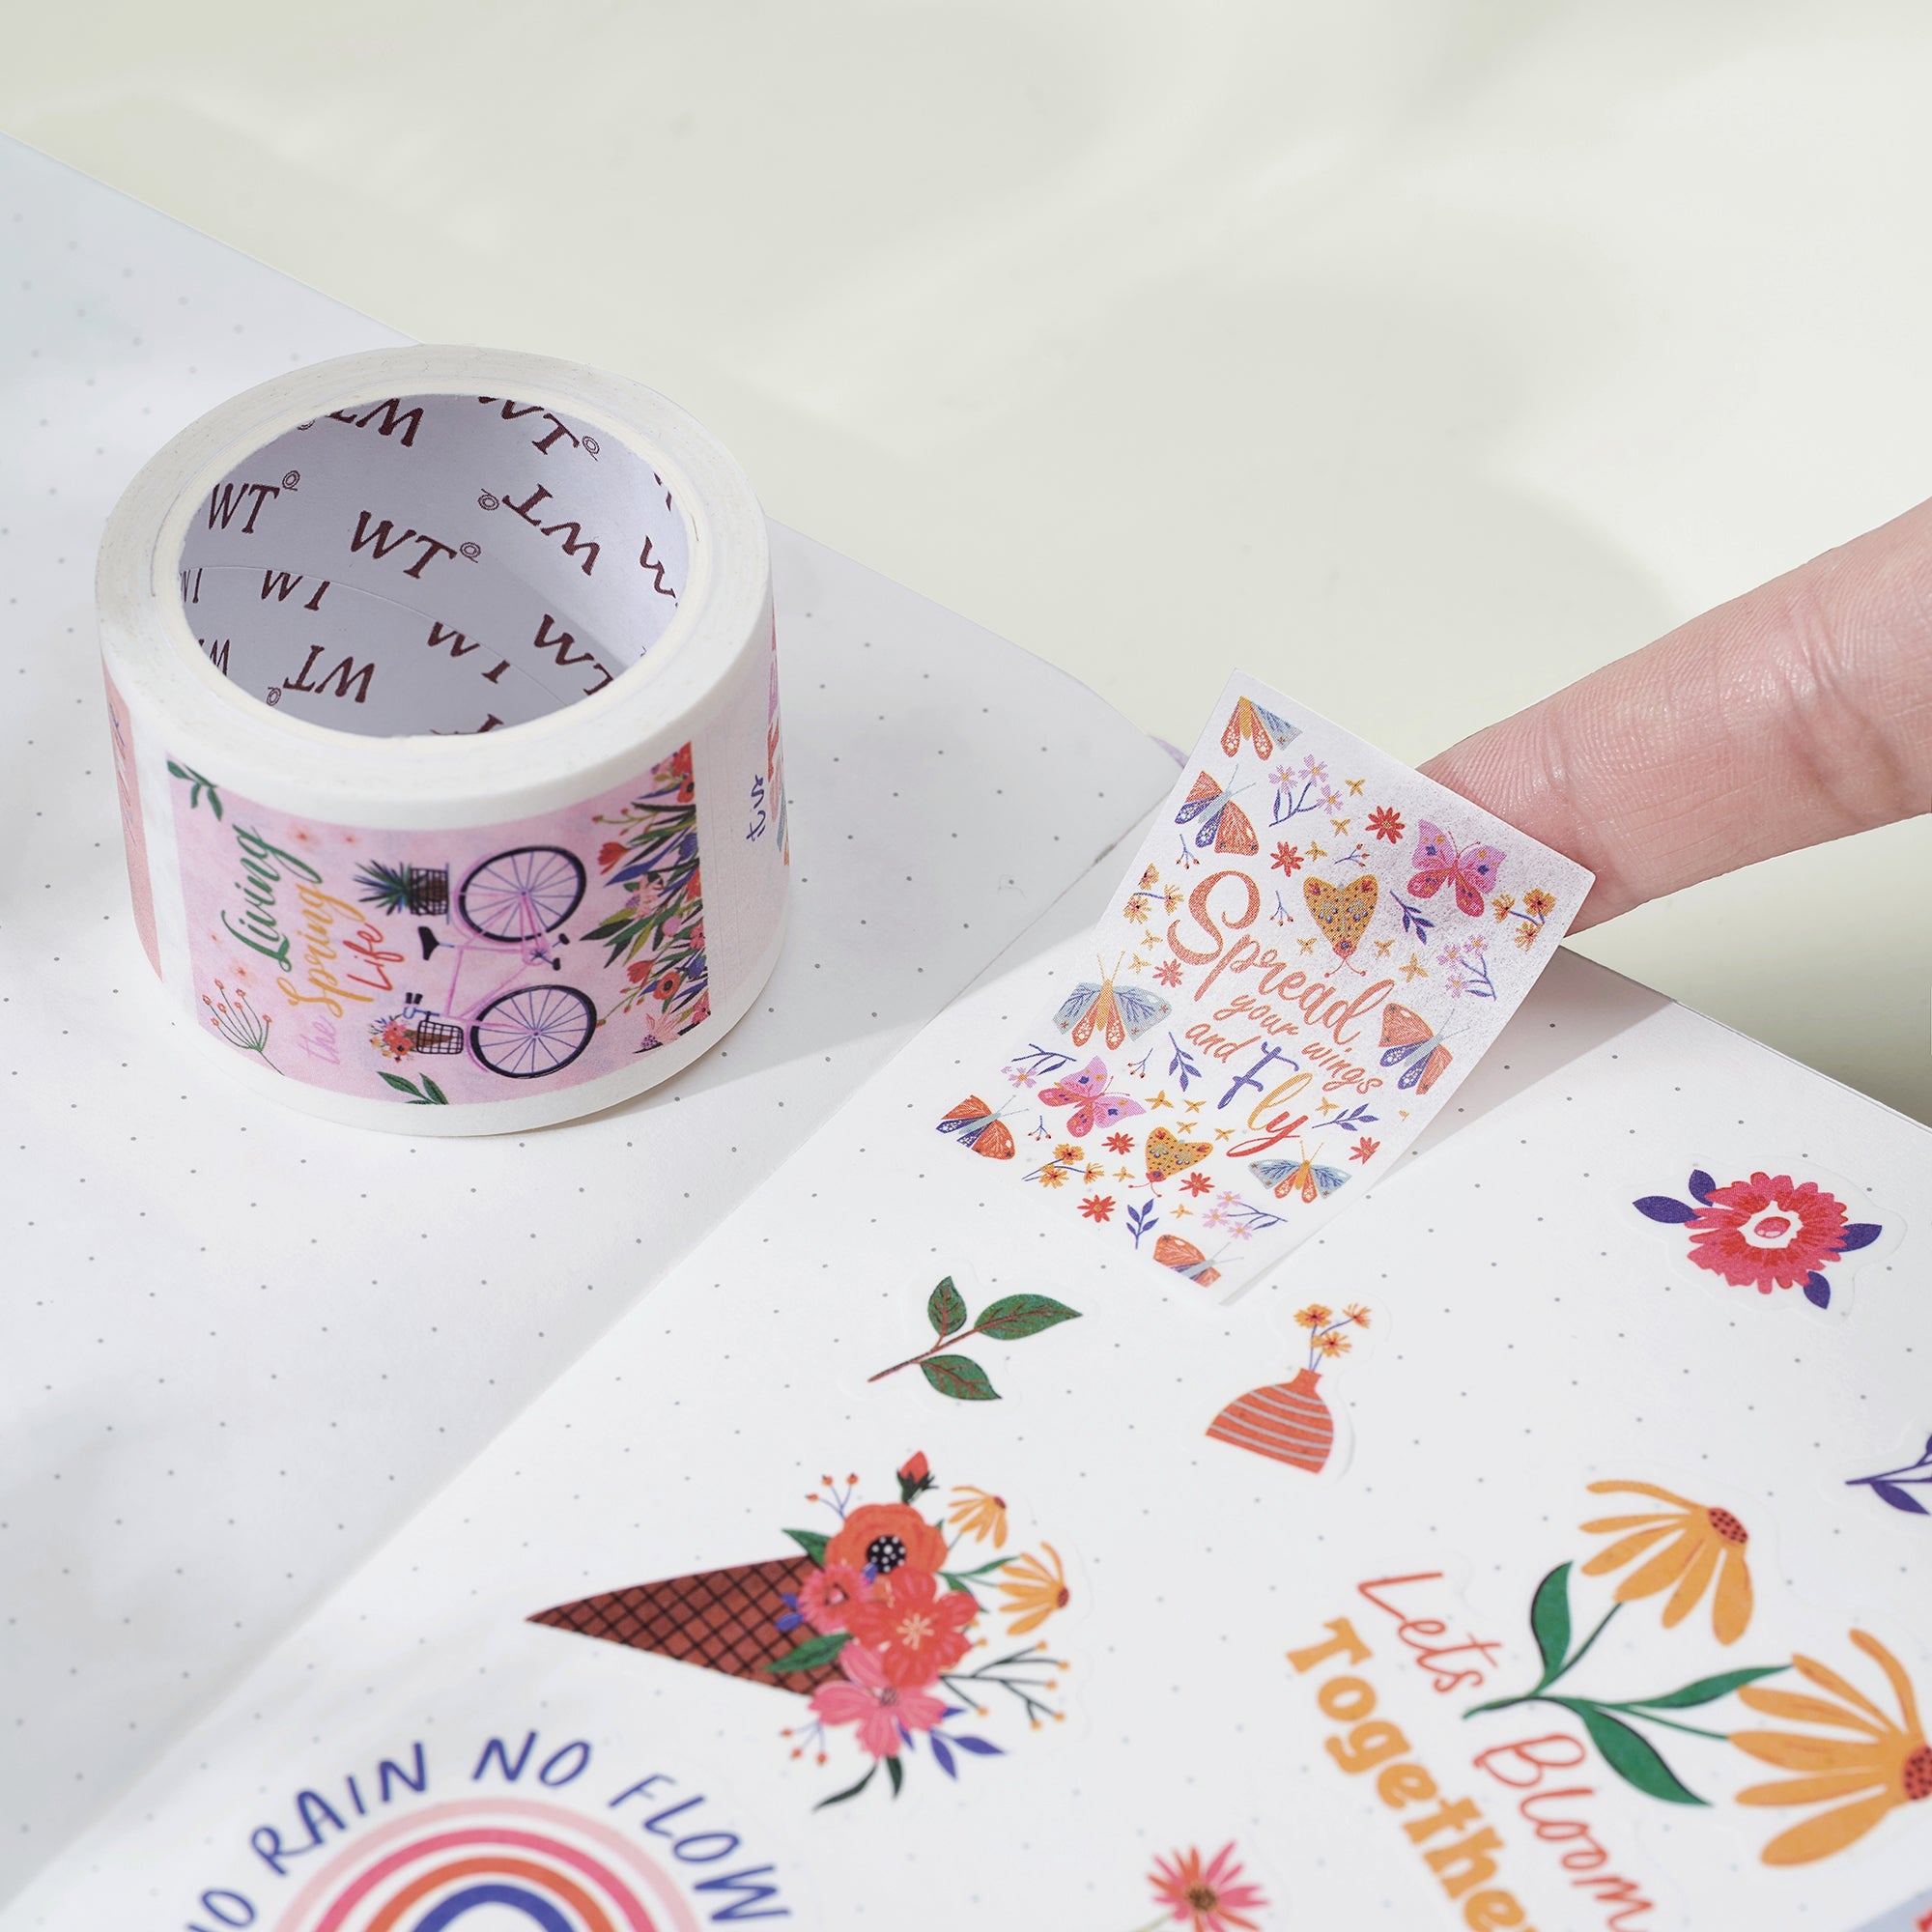 The Spring Gallery Washi Tape Sticker Set | The Washi Tape Shop. Beautiful Washi and Decorative Tape For Bullet Journals, Gift Wrapping, Planner Decoration and DIY Projects